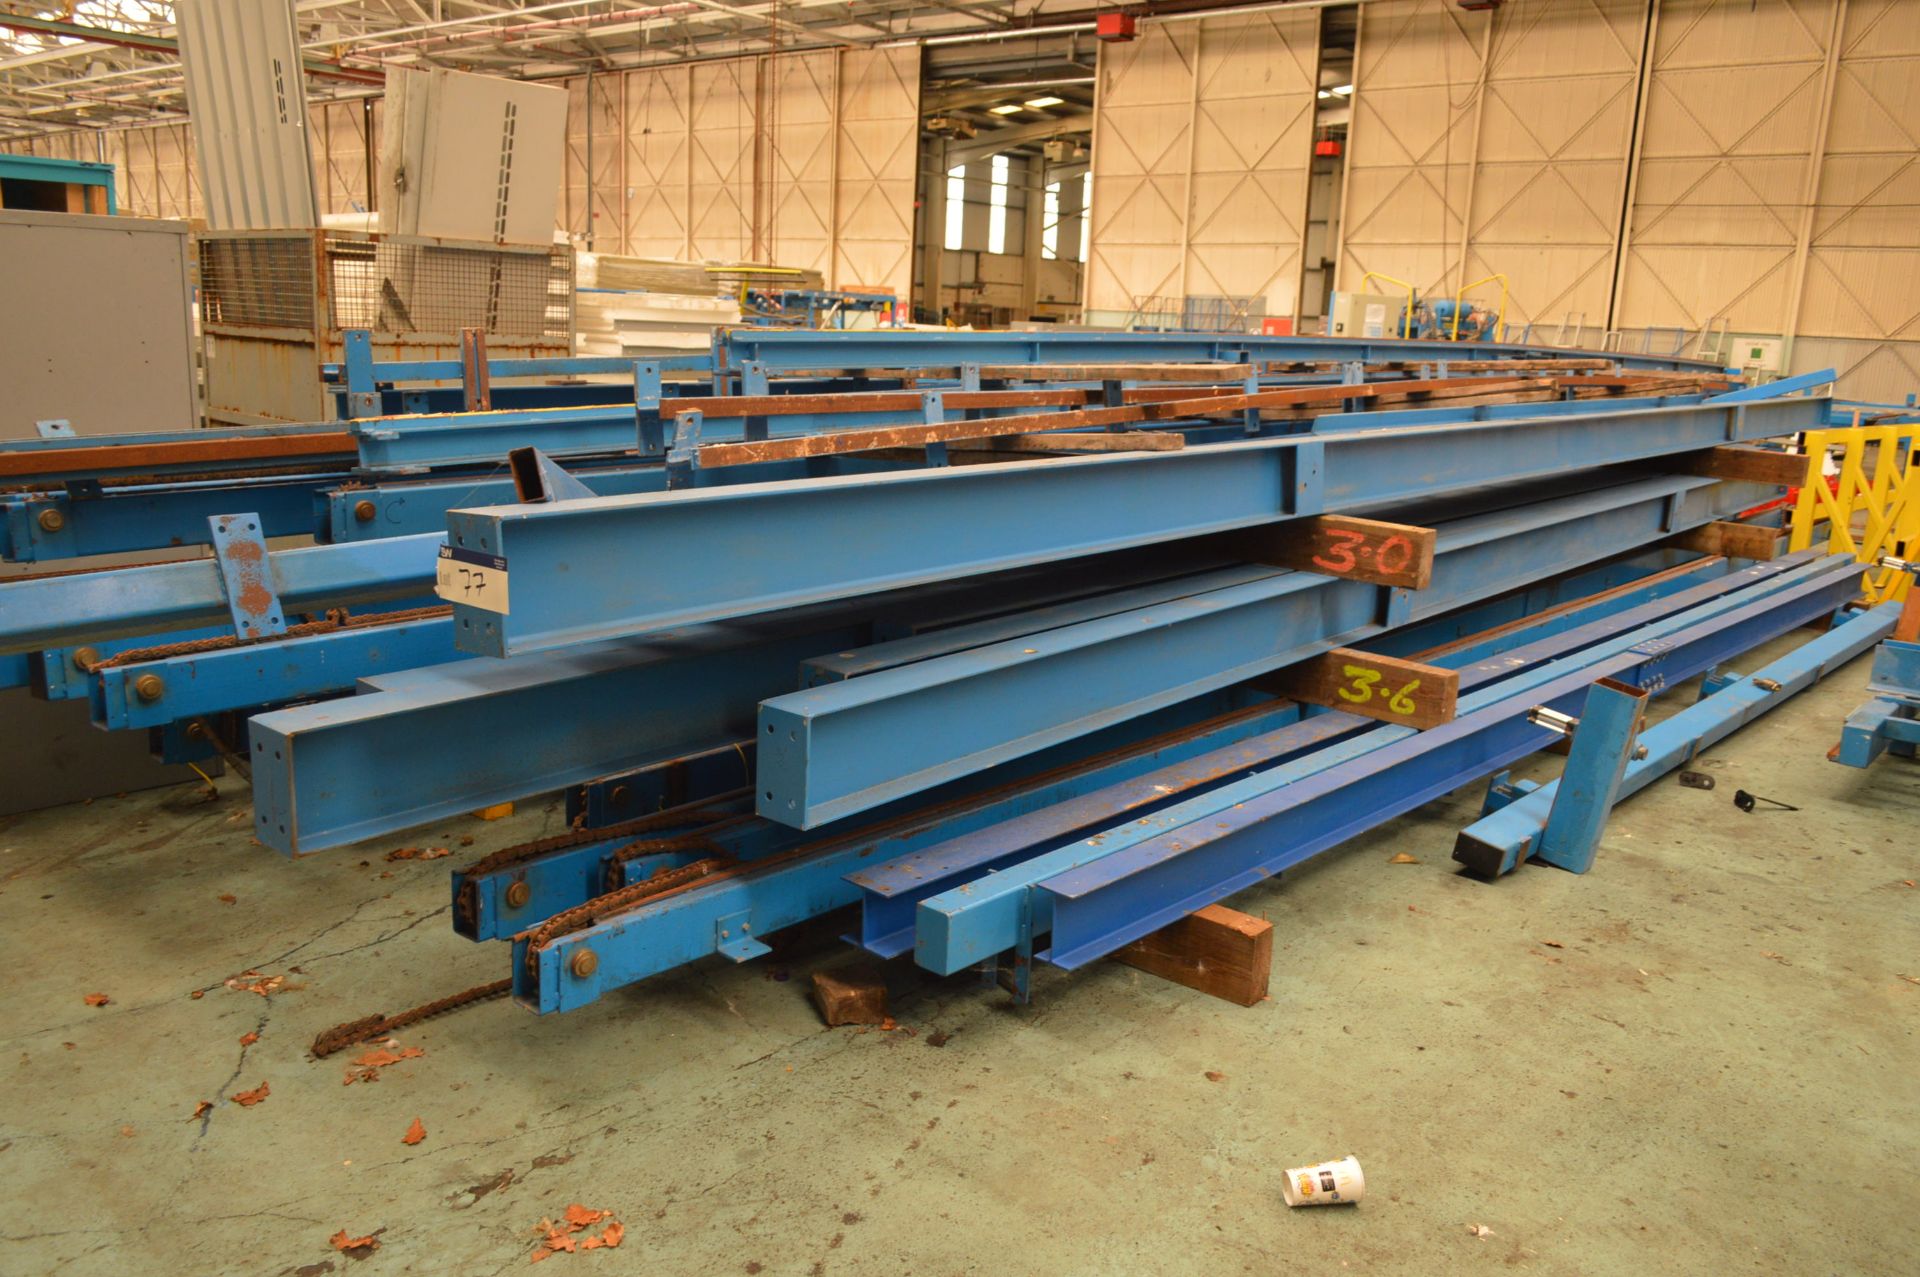 Chain Conveyor & Support Components, as set out in one stack